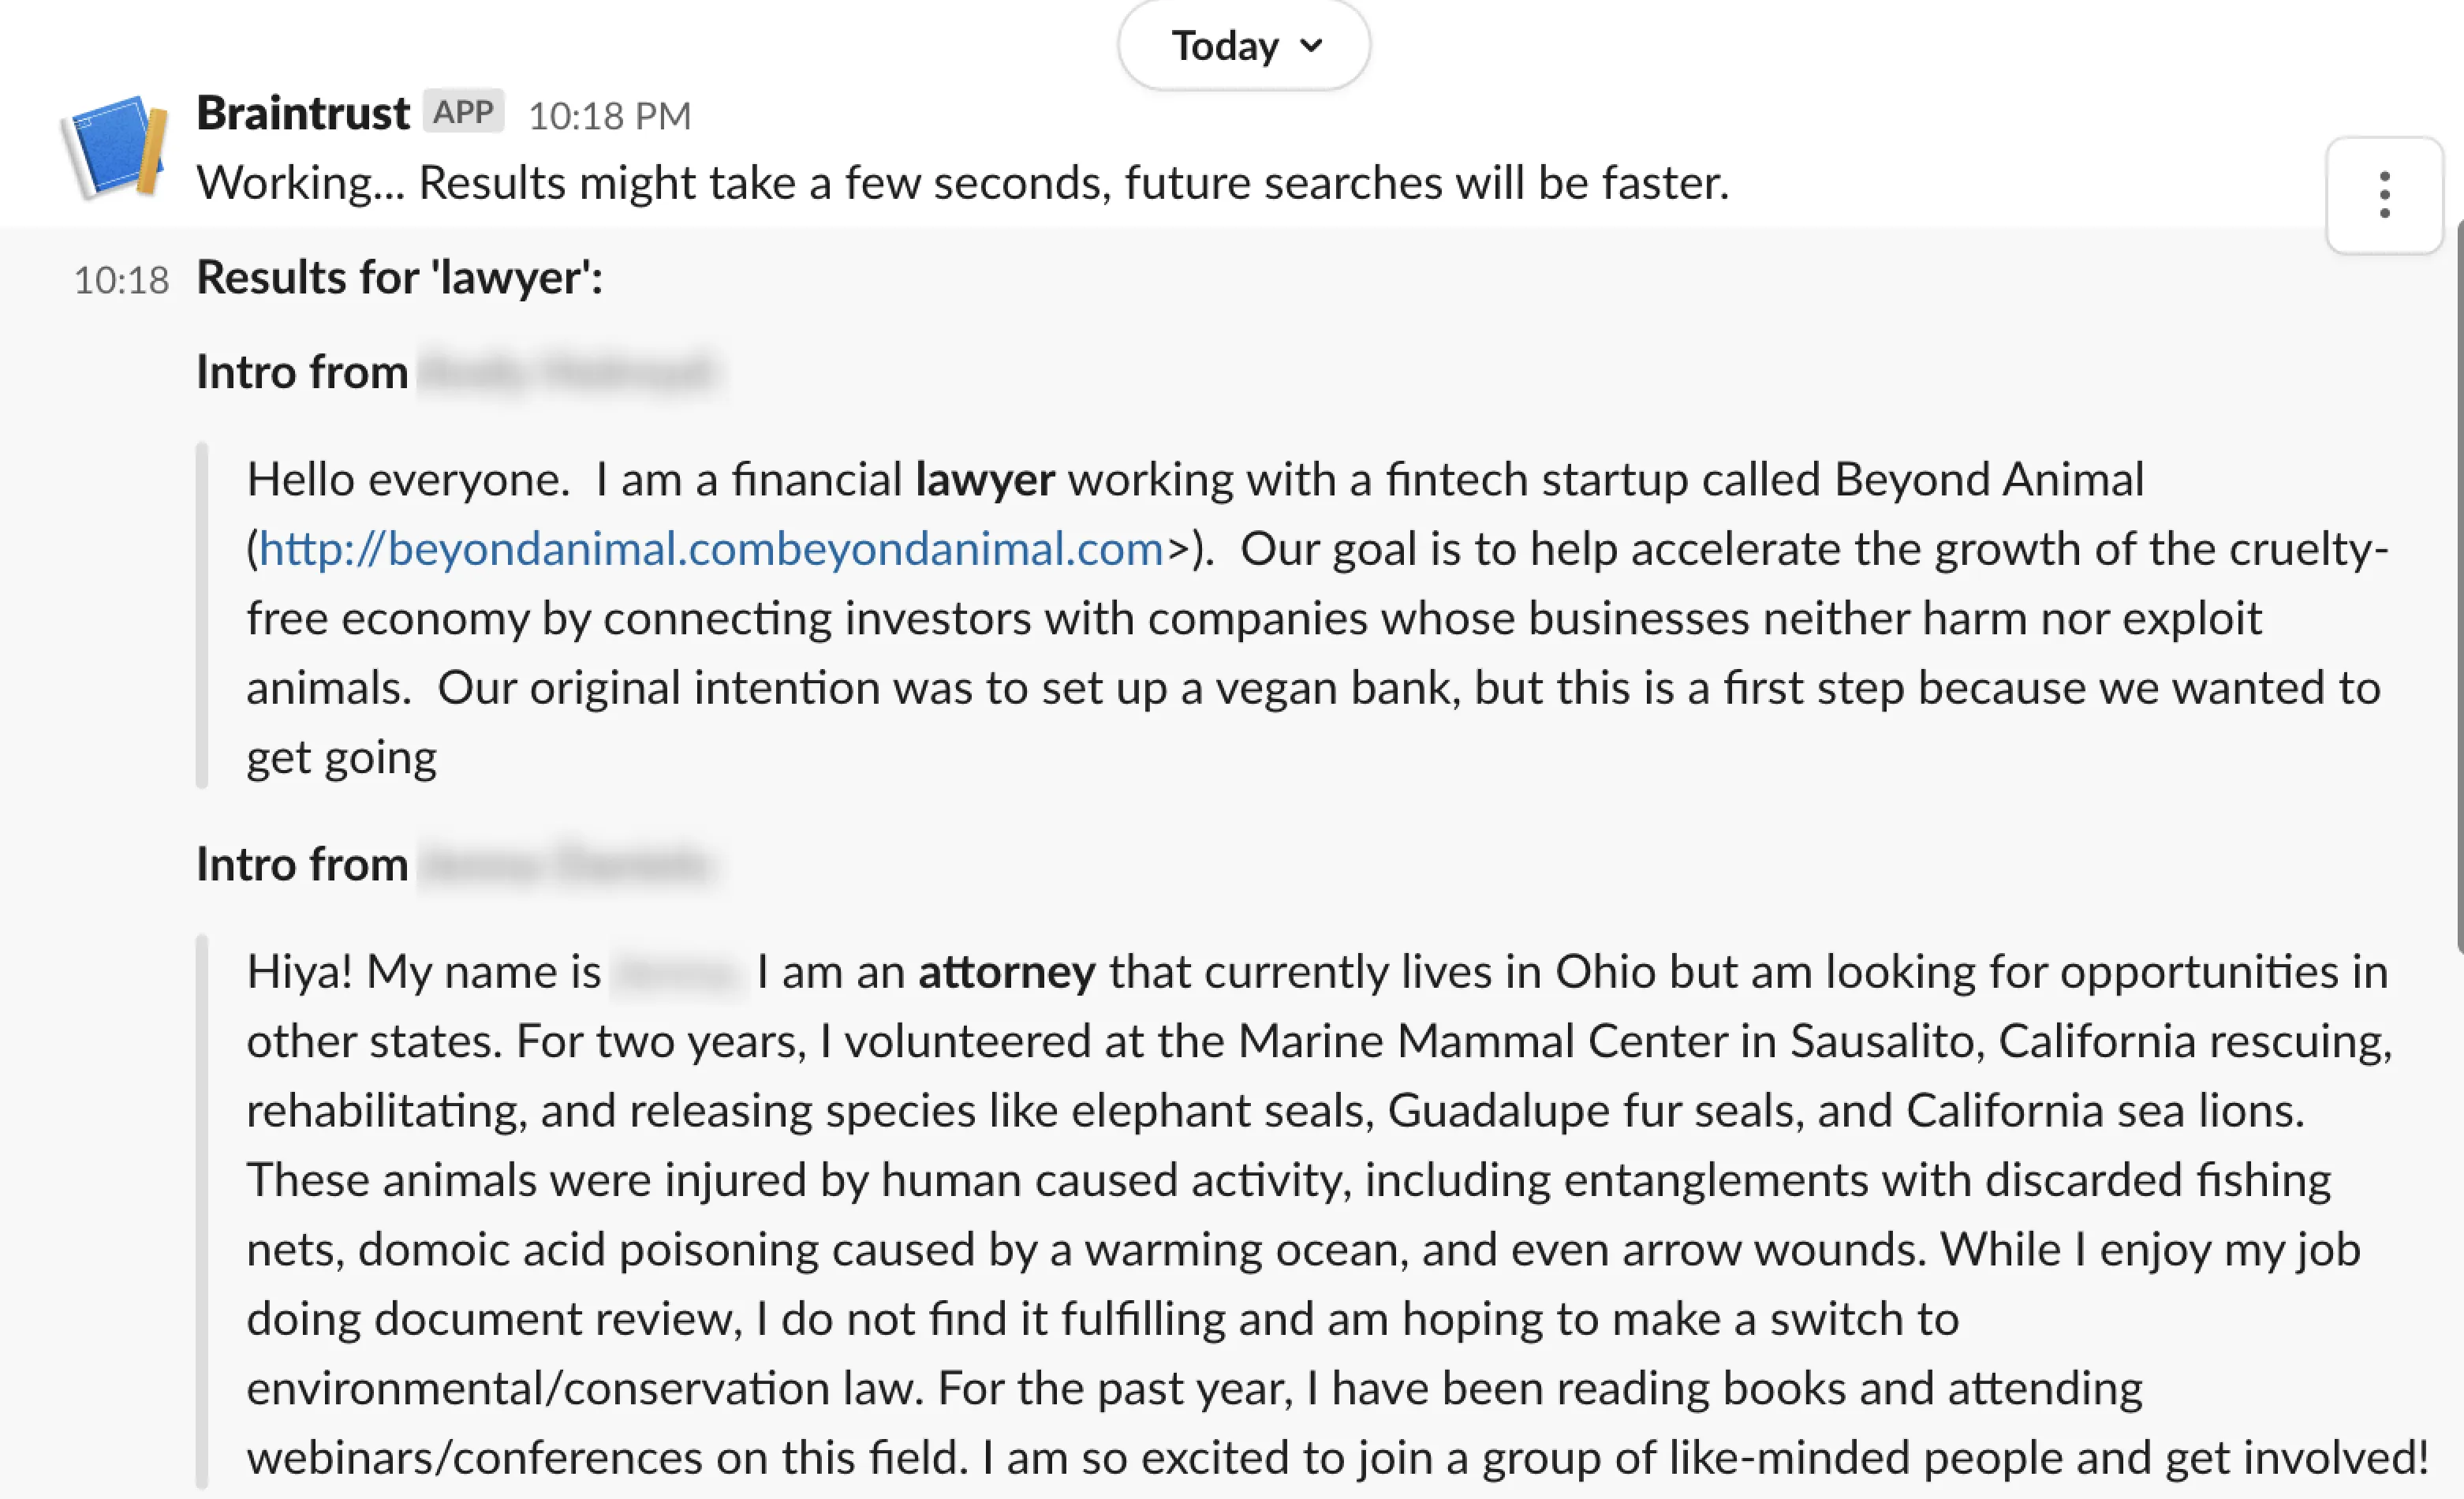 A screenshot of someone using the Braintrust slack bot to query 'lawyer,' with results that include 'attorney' being shown